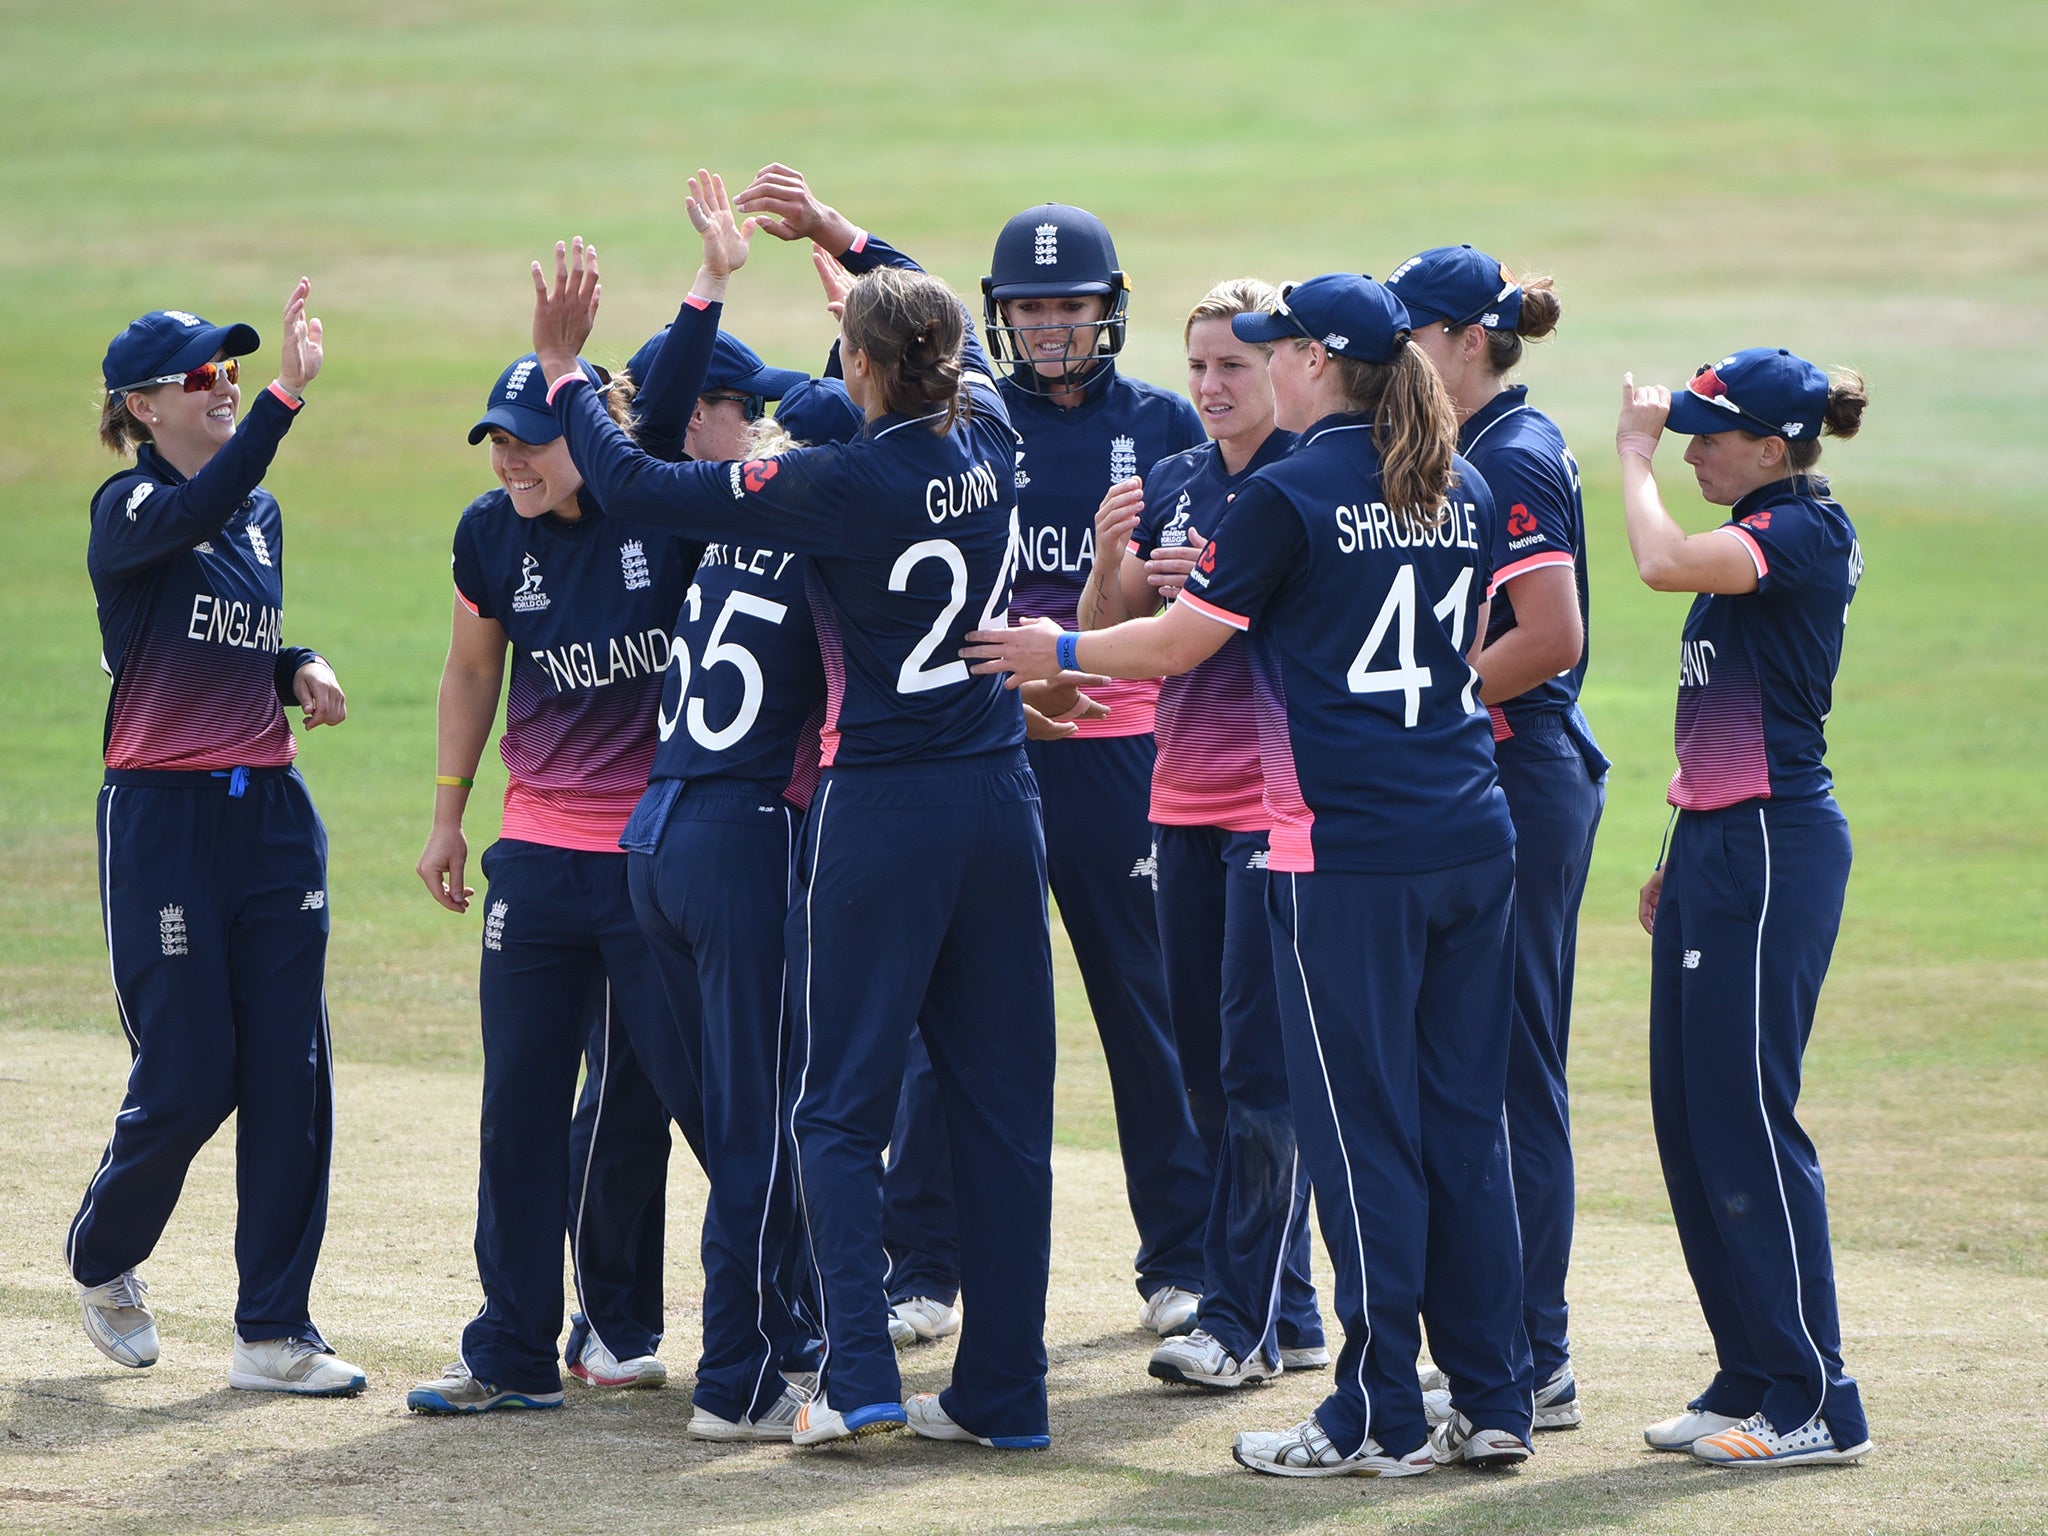 England join Australia and South Africa in the last four of the Women's World Cup